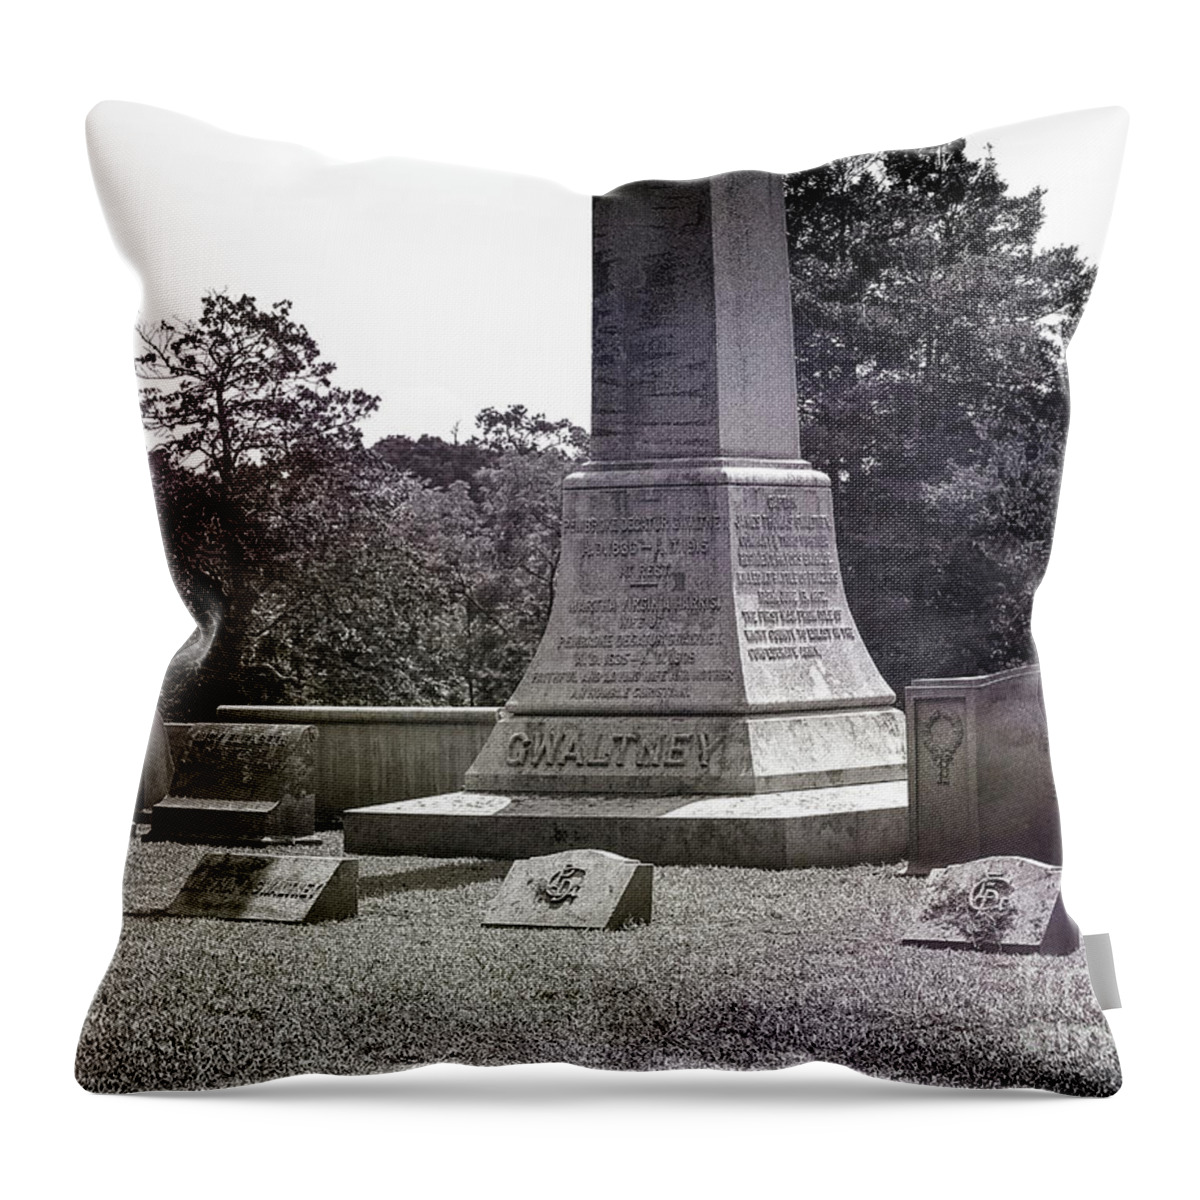 Photoshop Throw Pillow featuring the photograph Gwaltney Cemetery by Melissa Messick